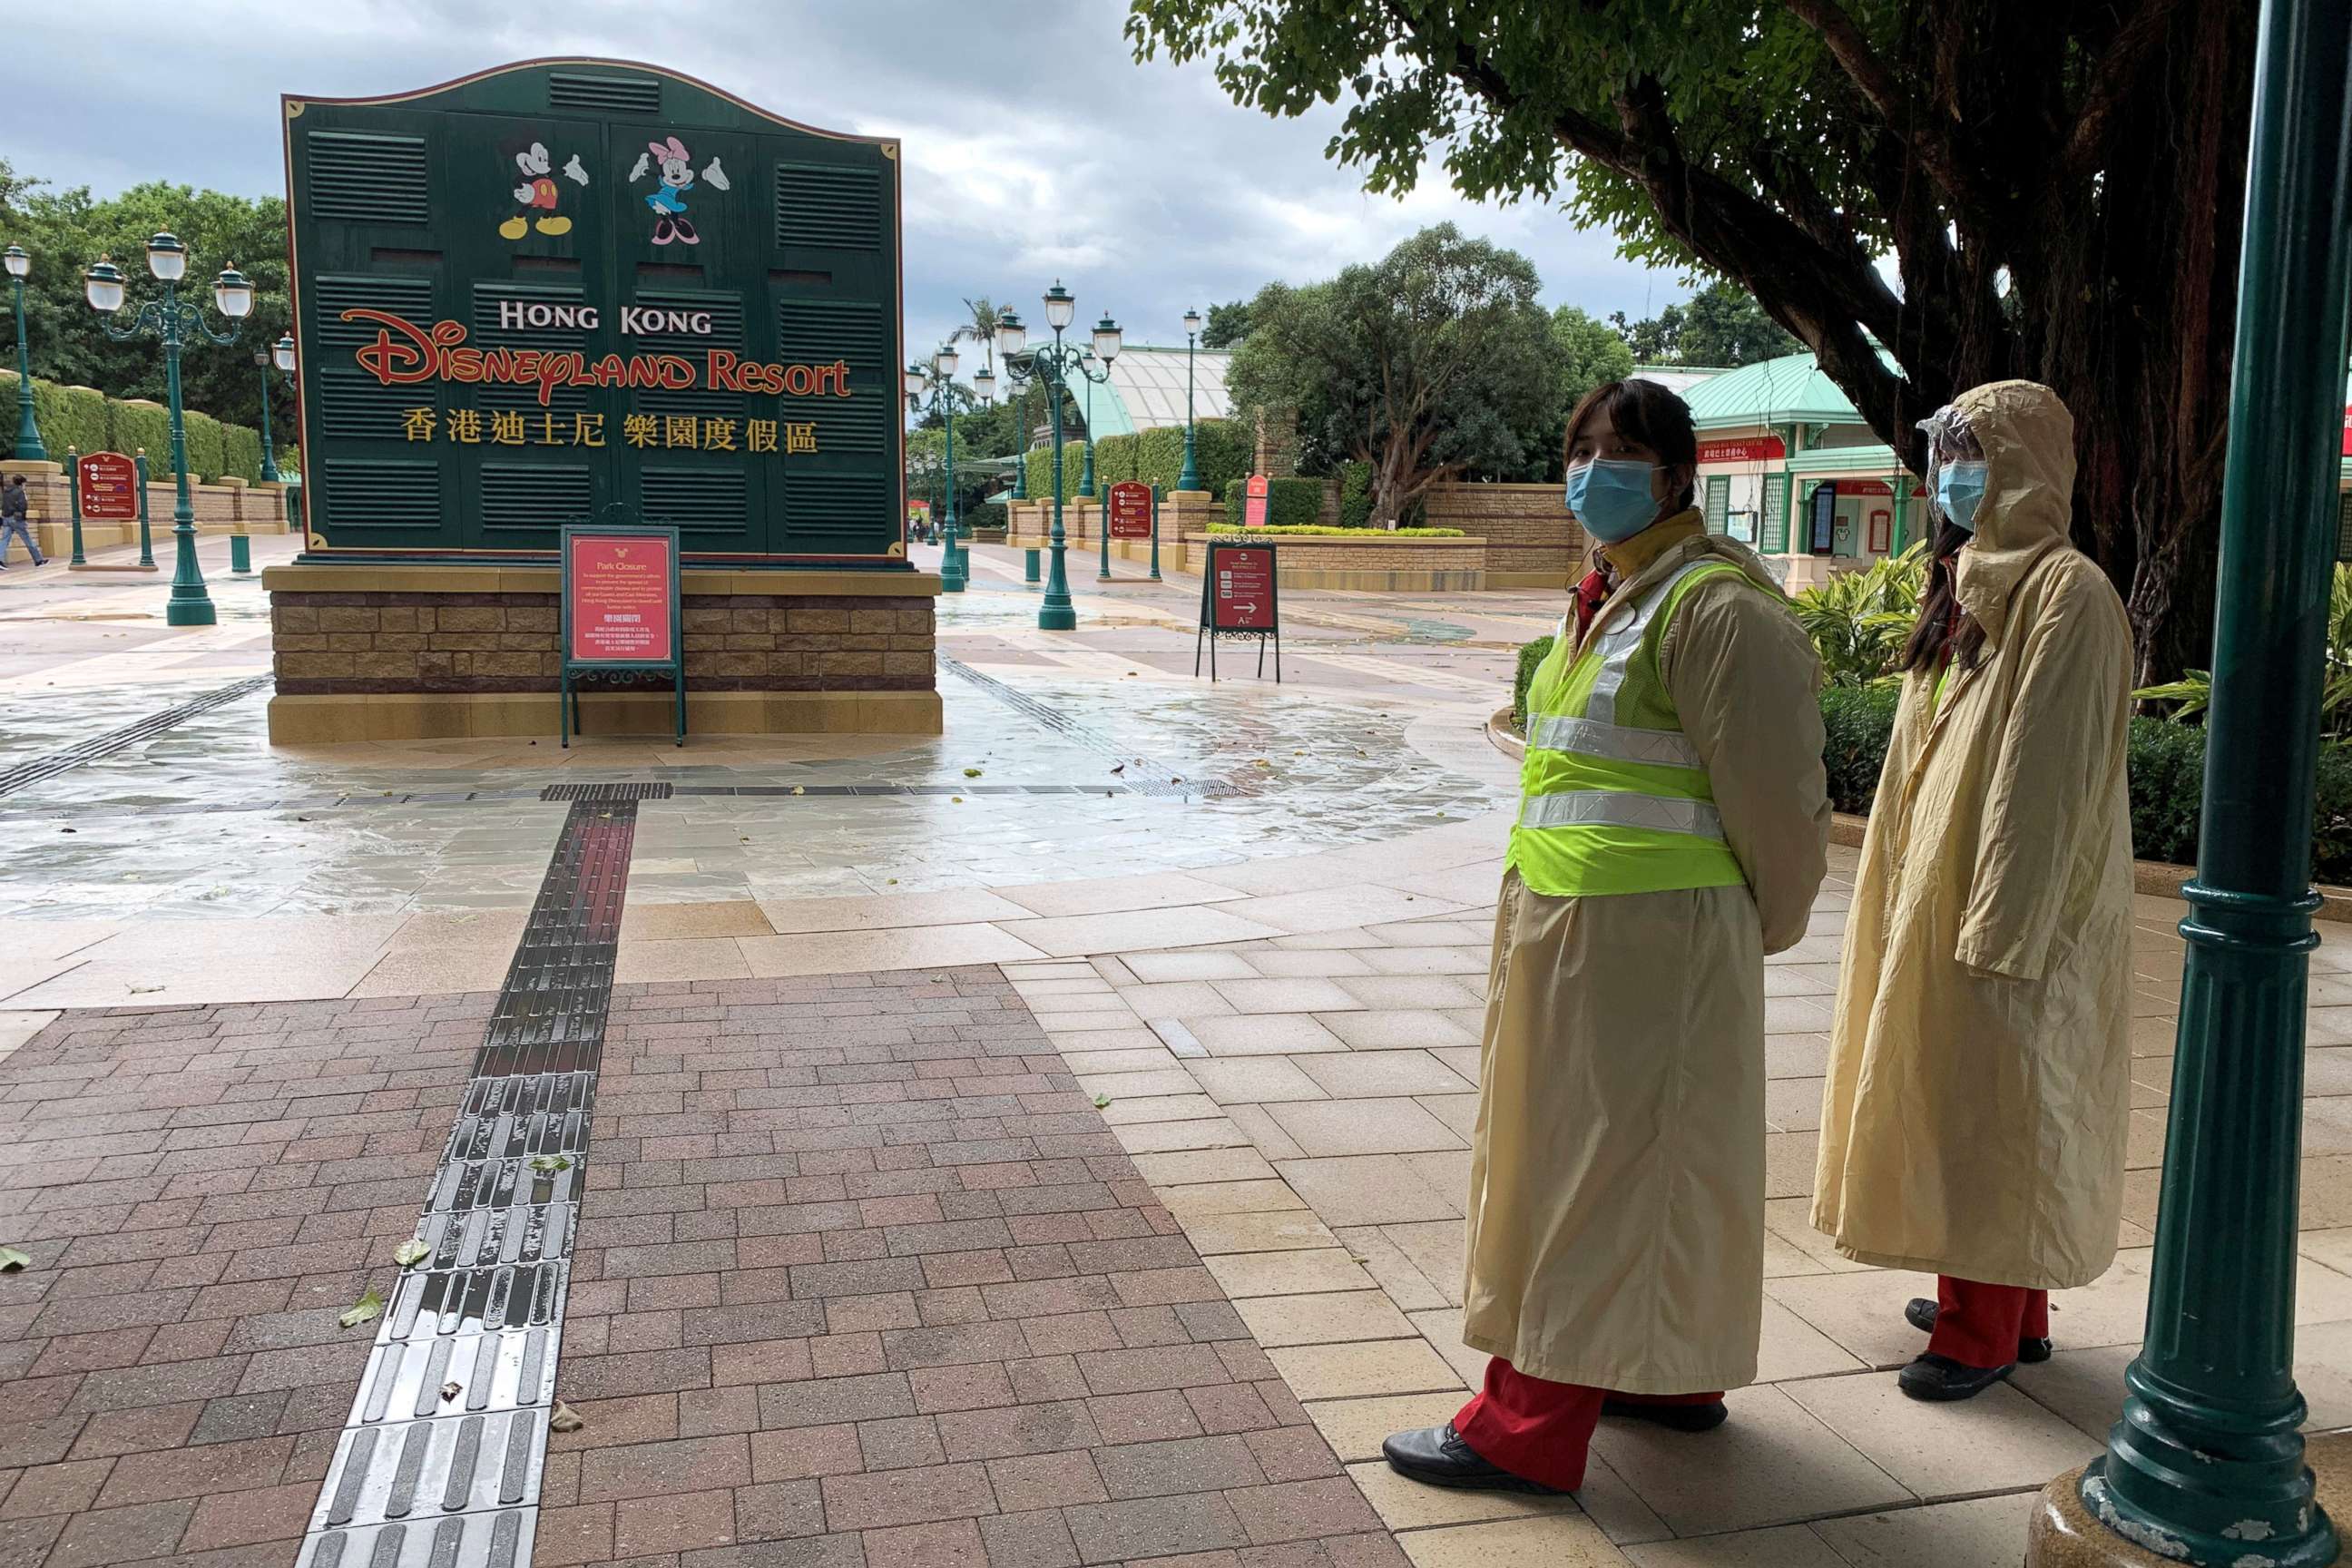 PHOTO: Employees wearing protective masks stand outside the Hong Kong Disneyland theme park that has been closed, following the coronavirus outbreak, in Hong Kong, China January 26, 2020.